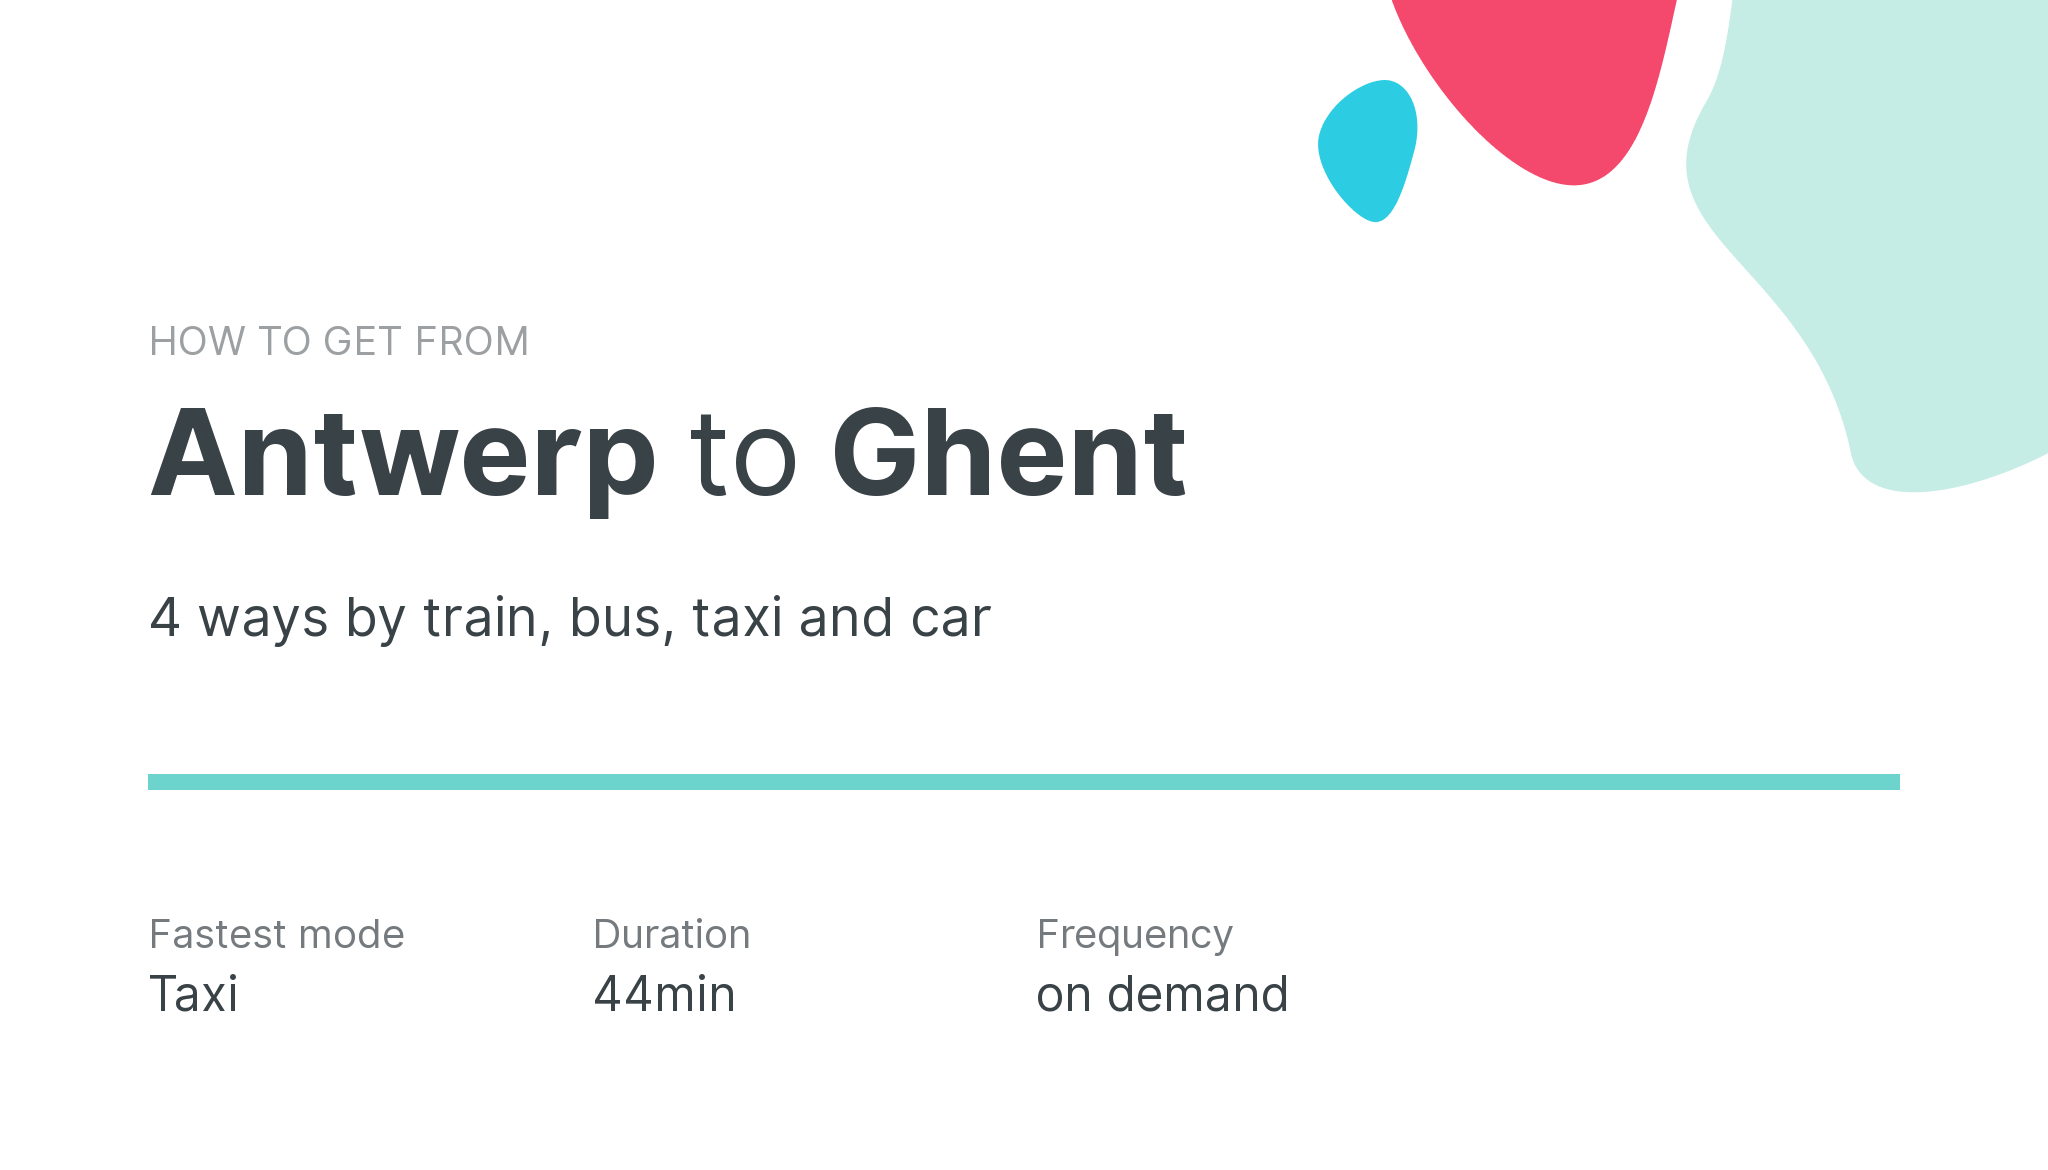 How do I get from Antwerp to Ghent